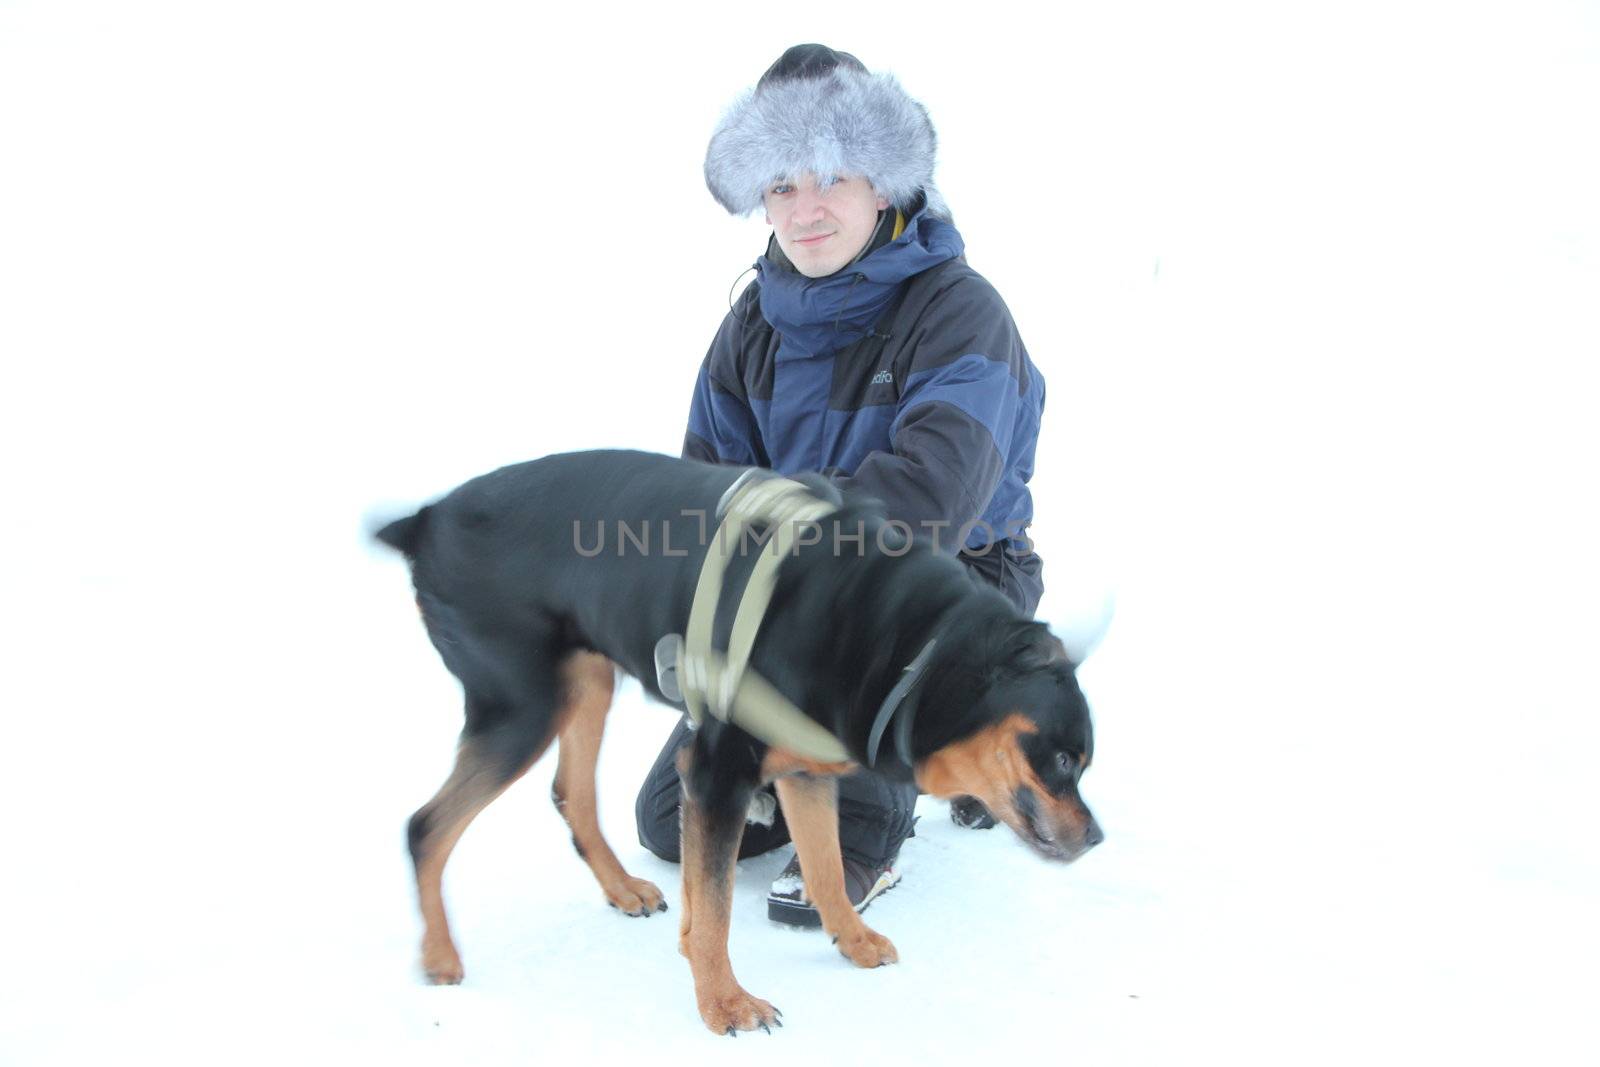 Men with rottweiler. Winter. isolated on white